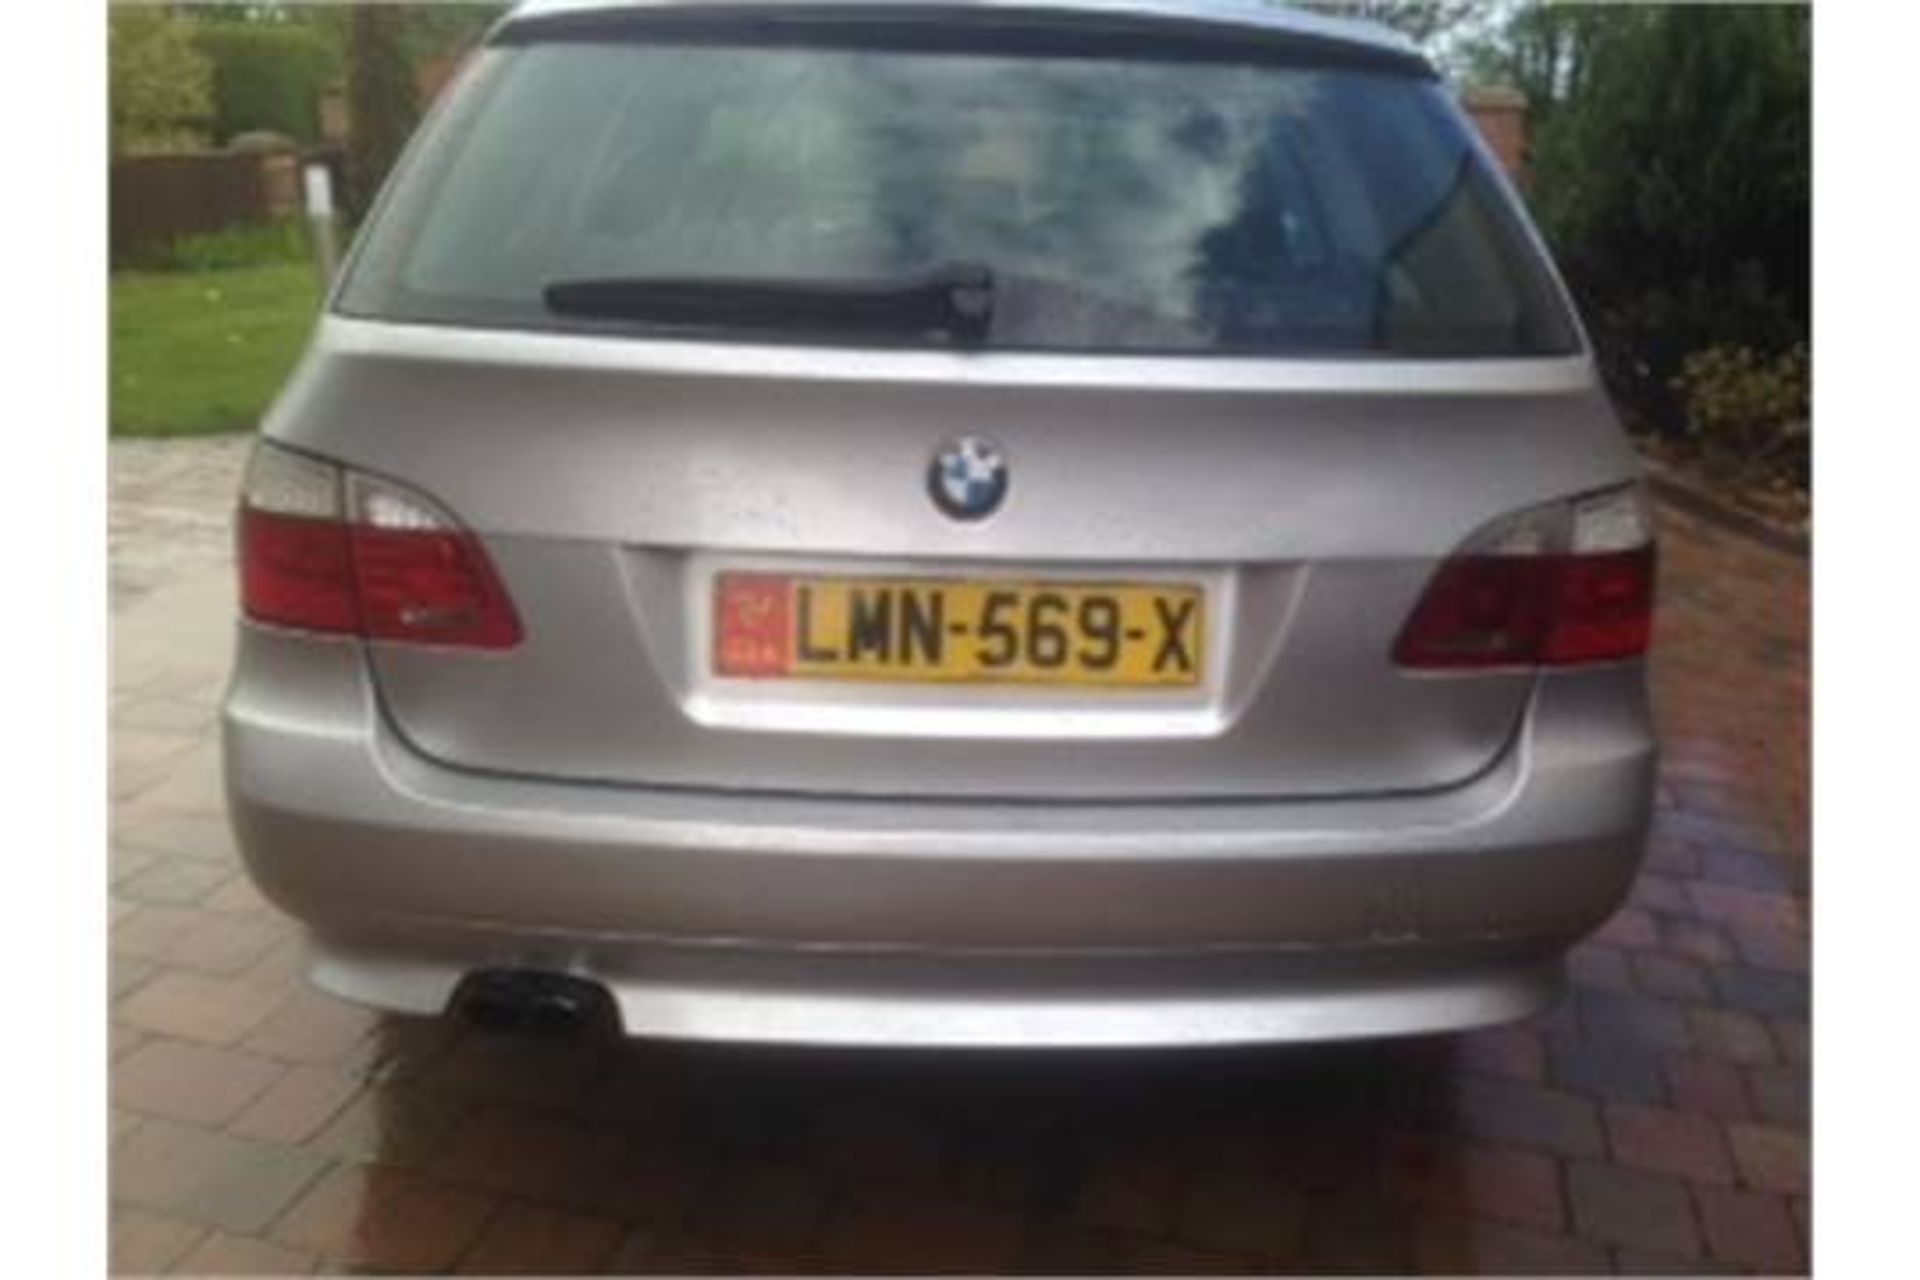 BMW 5 SERIES TOURING 530D, BX58 PNN, 3.0L TD 6 SPEED, DIESEL, AUTOMATIC I DRIVE, 5 DOOR, 95,000 - Image 4 of 10